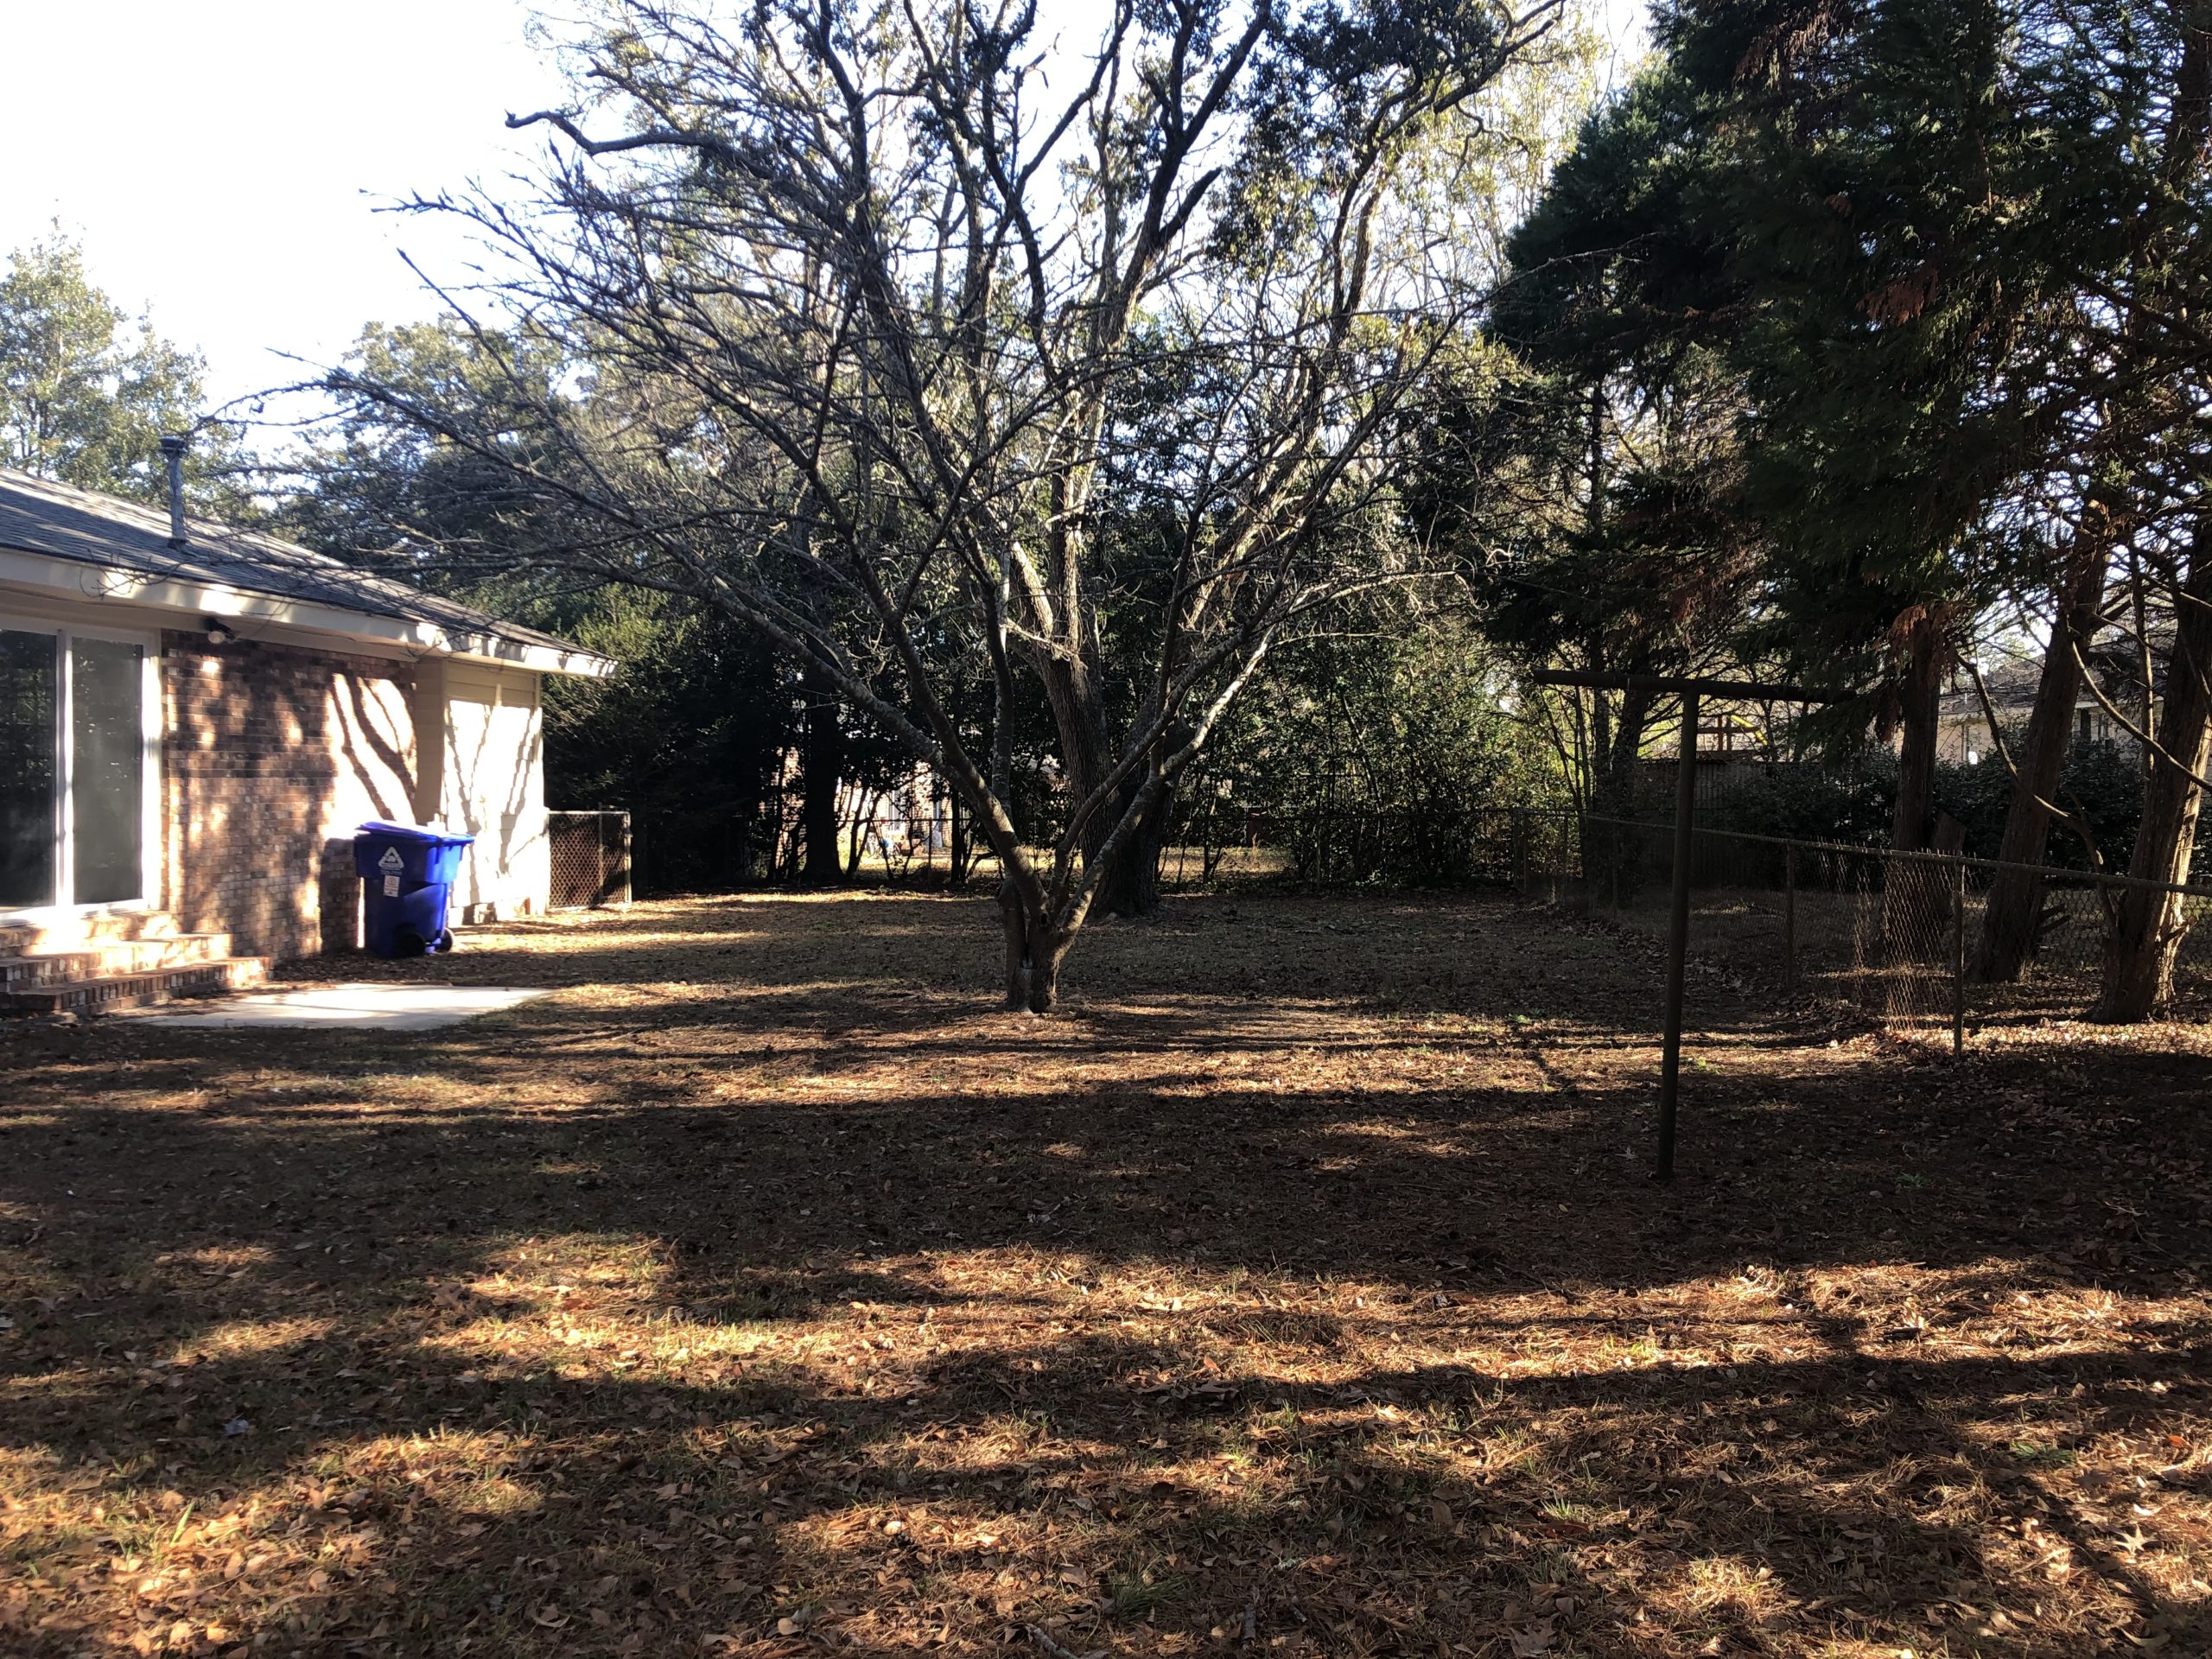 An image of the yard next to the house at 1832 Gippy Lane West Ashley Plantation